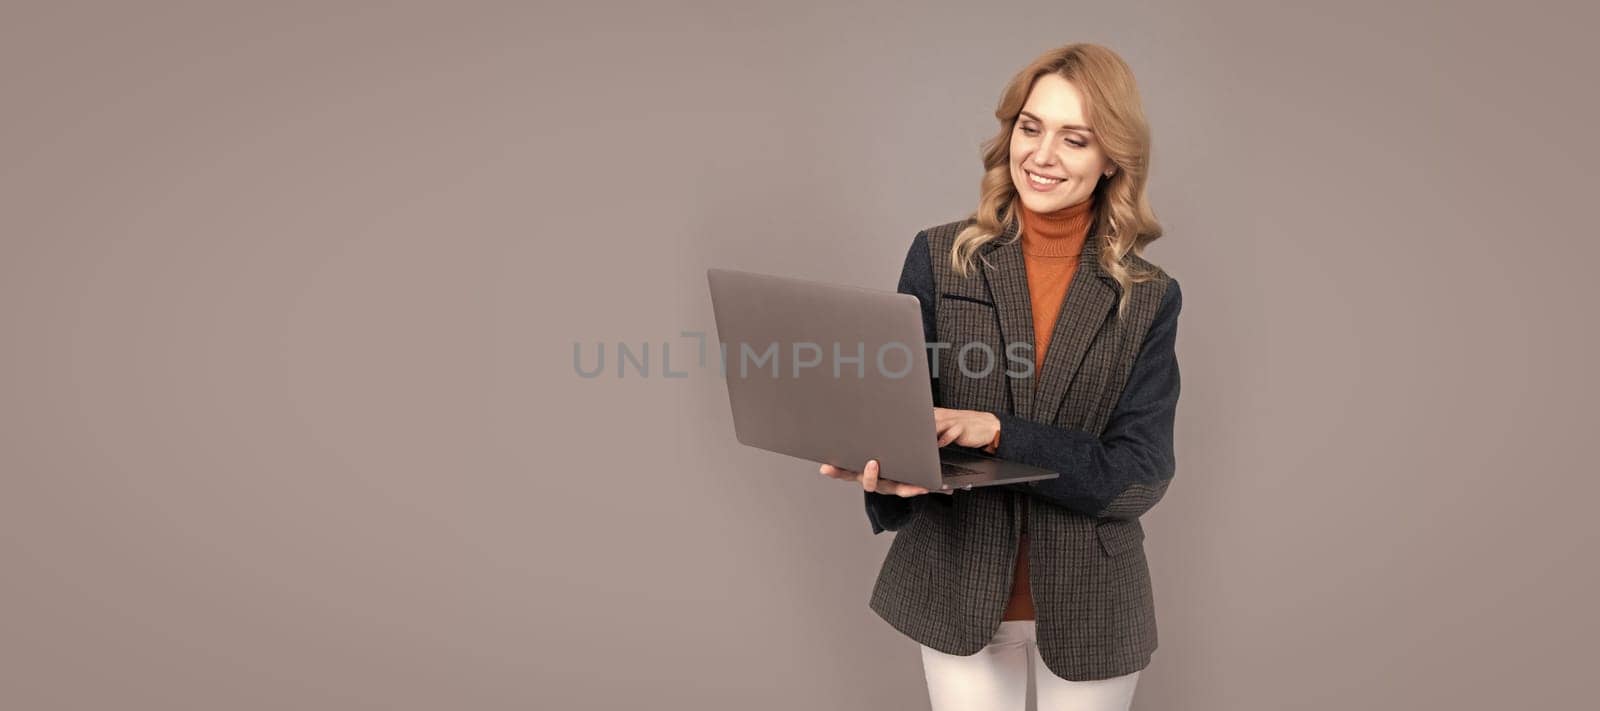 Let your fingers do the talking. Freelance writer post blog online. Writing online. Woman portrait, isolated header banner with copy space